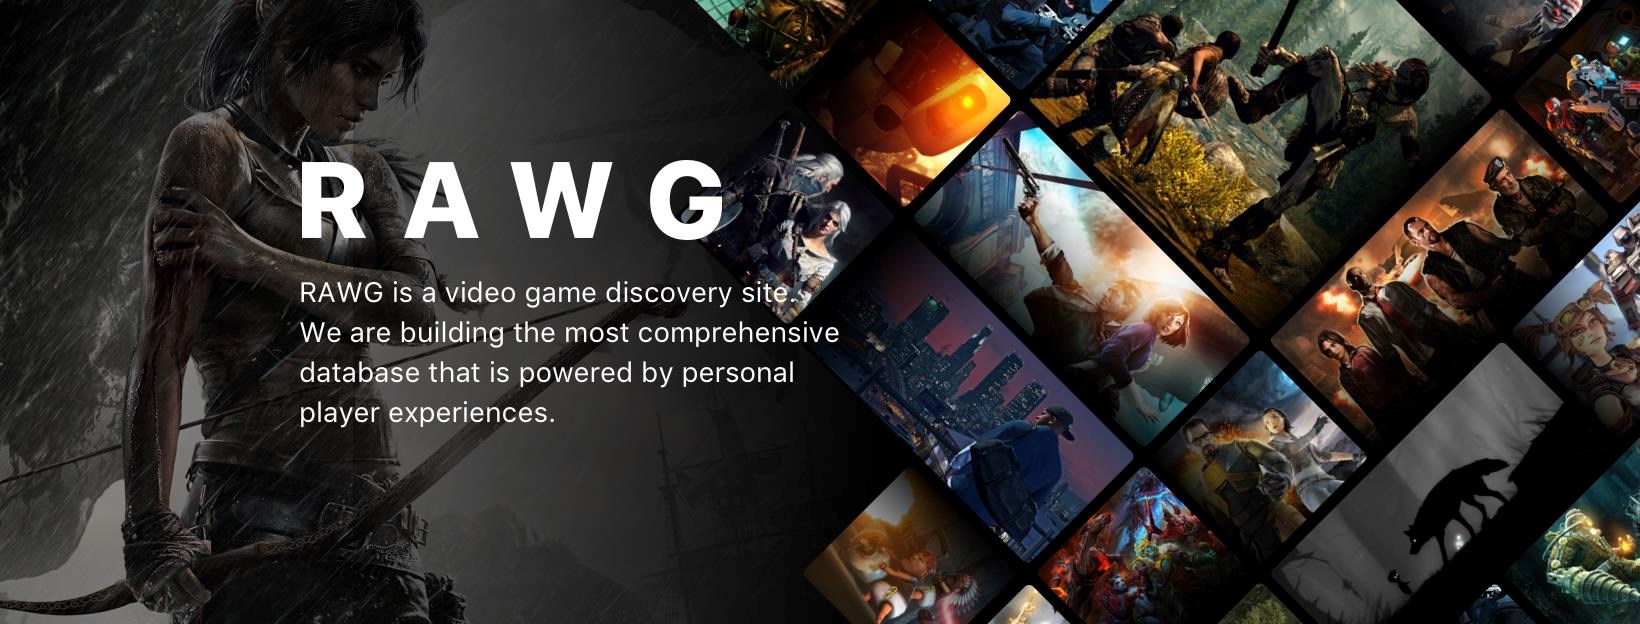 Discover games. Discovery игра. Видеоигры на его смартфоне.. RAWG. Discovery game.